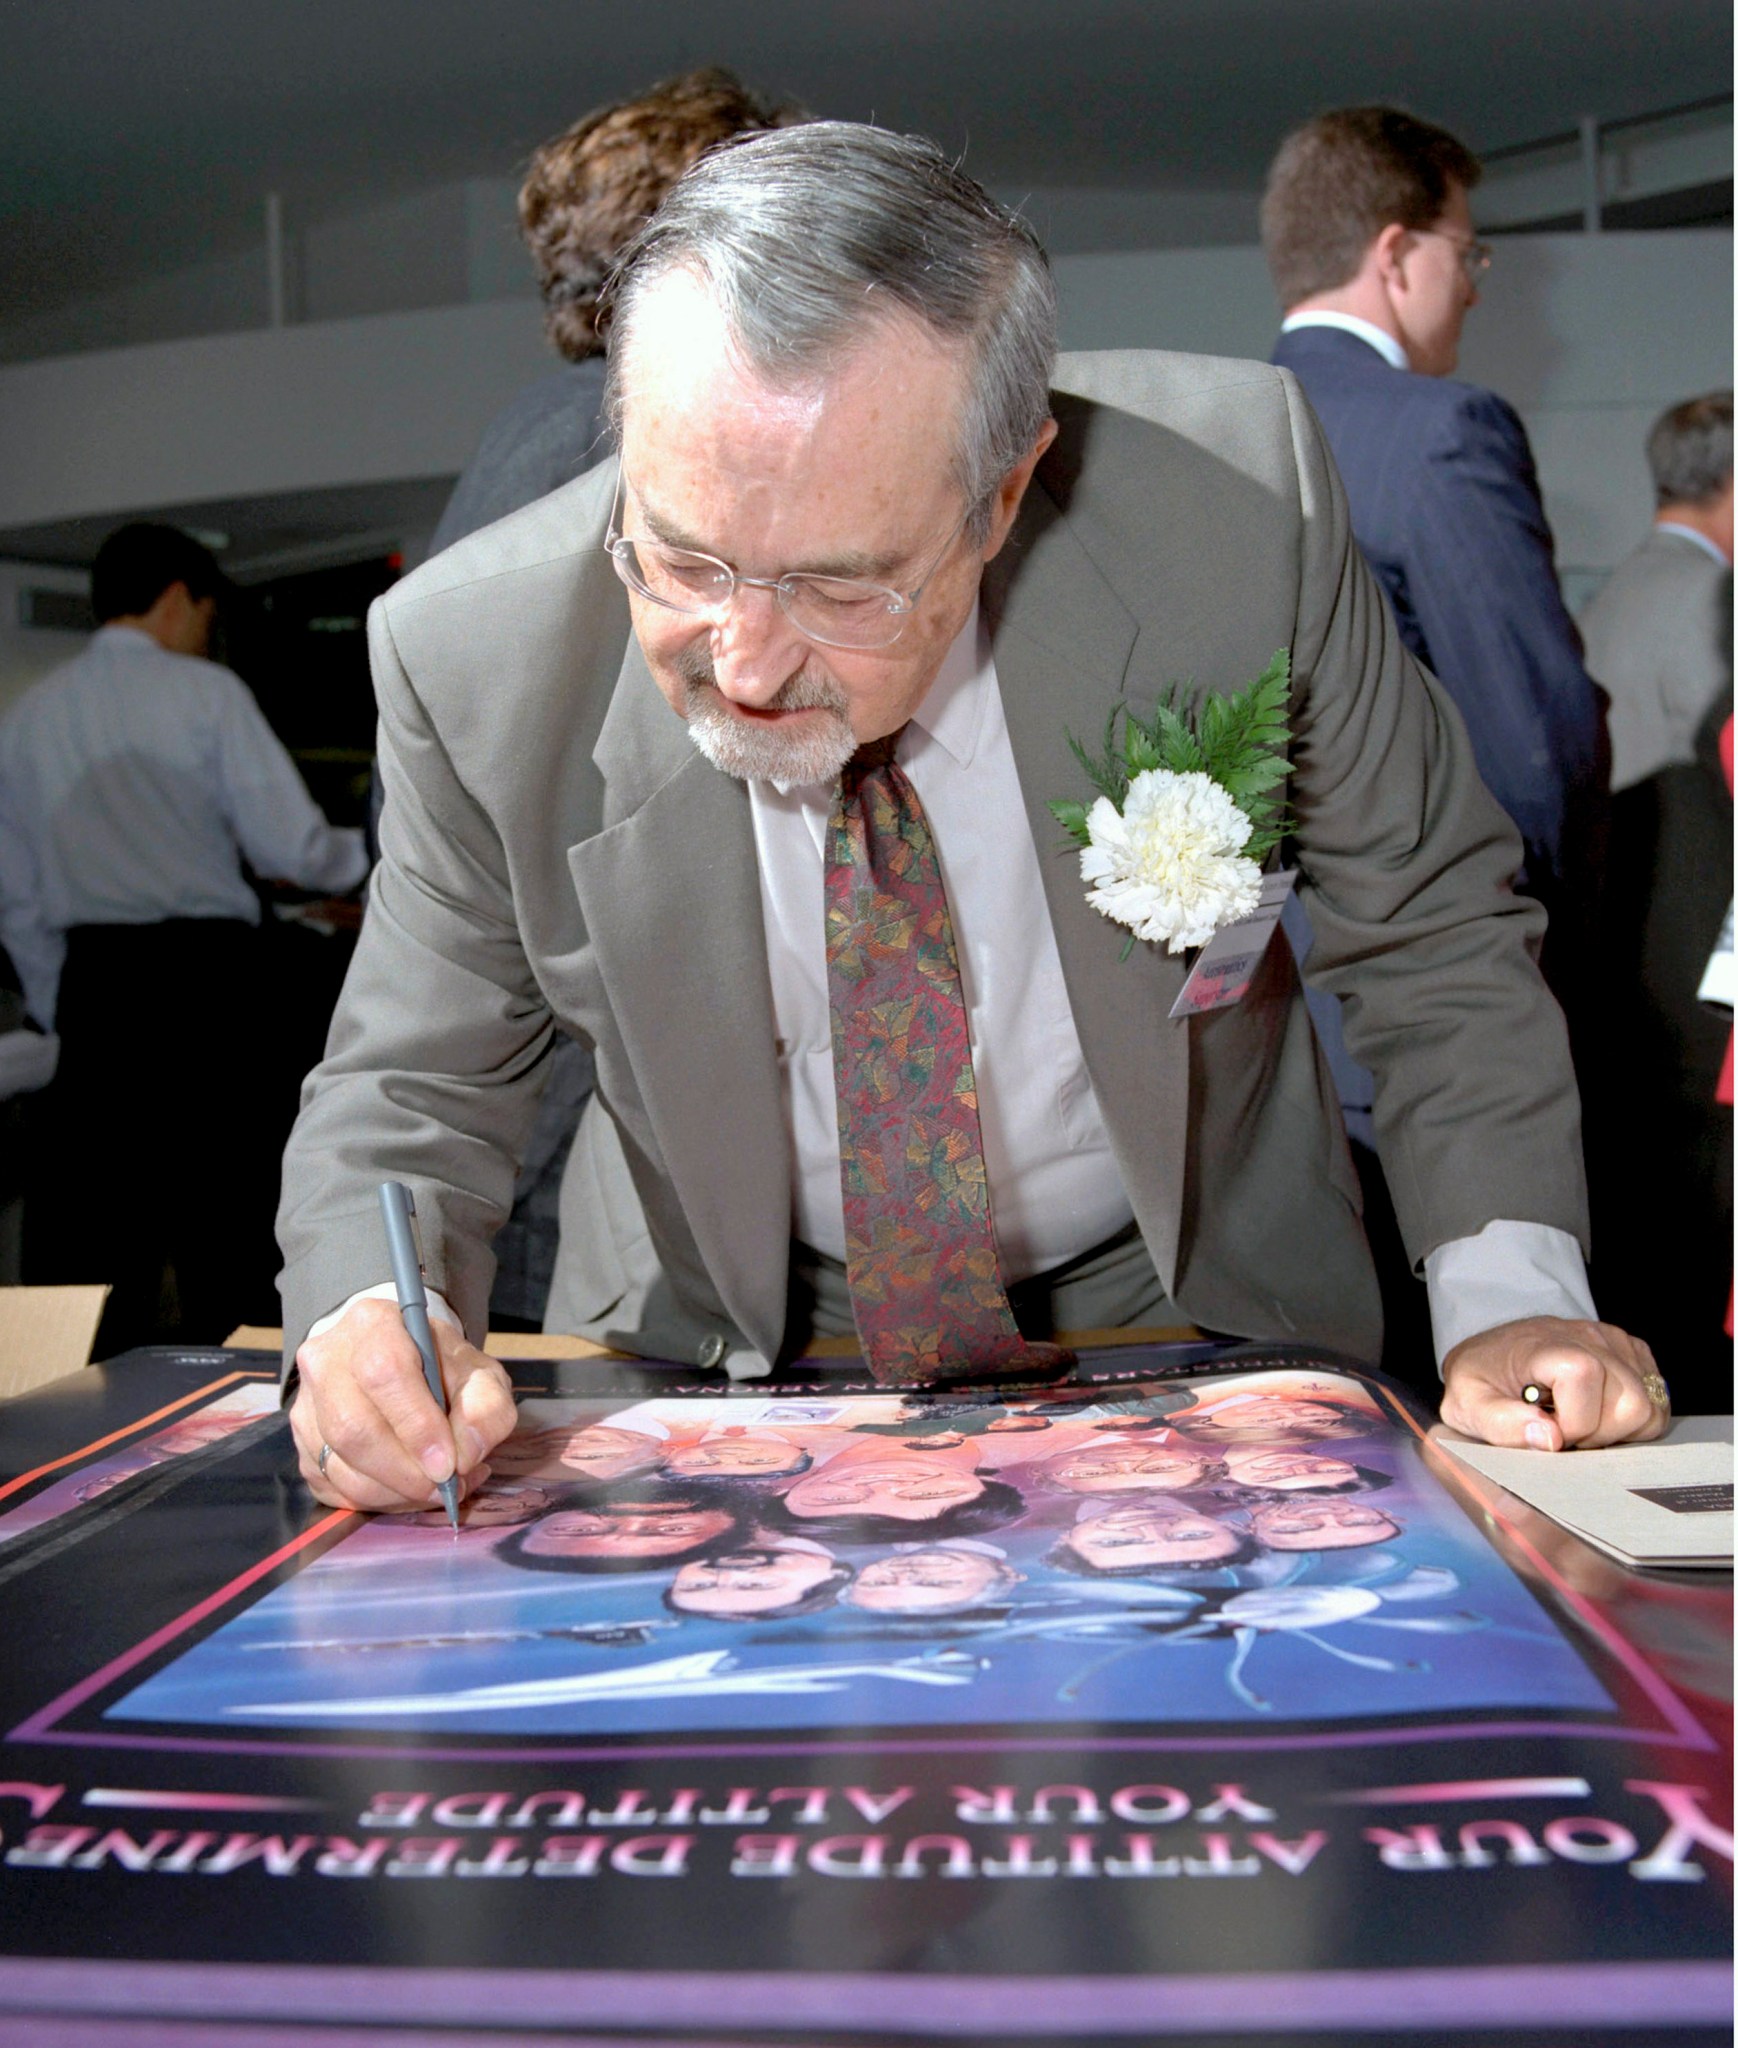 Man autographing a poster.